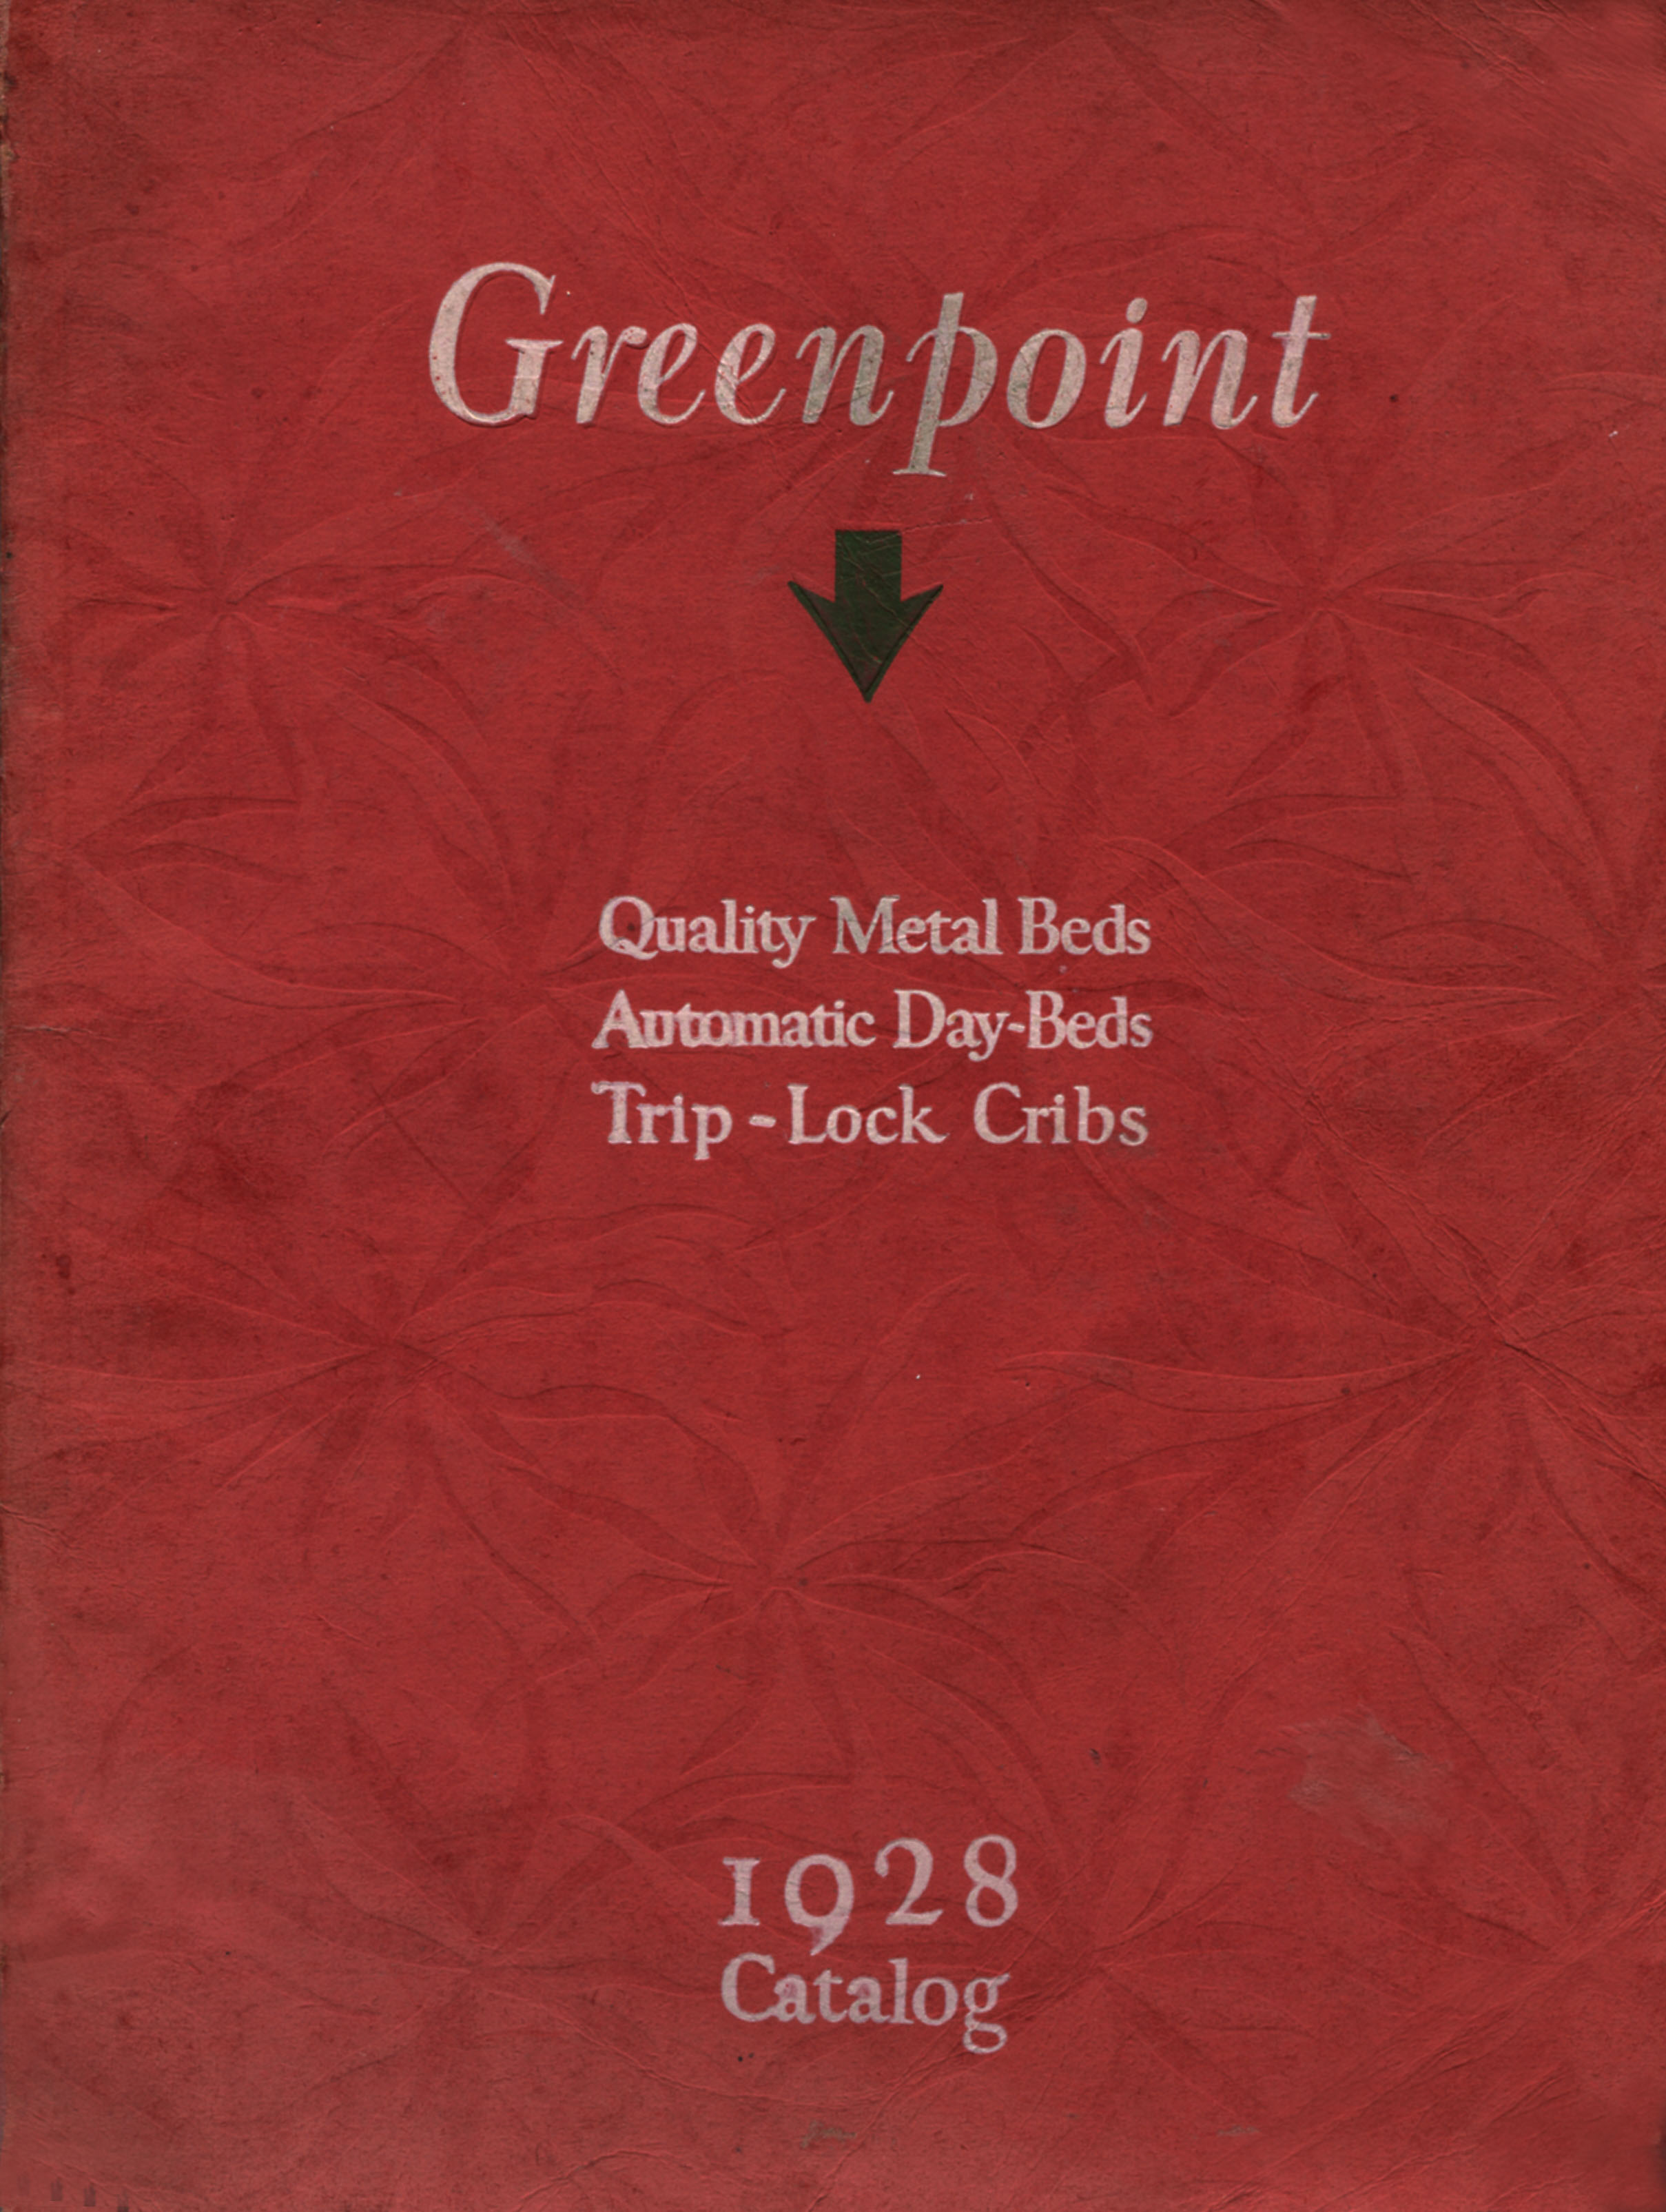 Greenpoint Bed Company Bed Catalog Cover